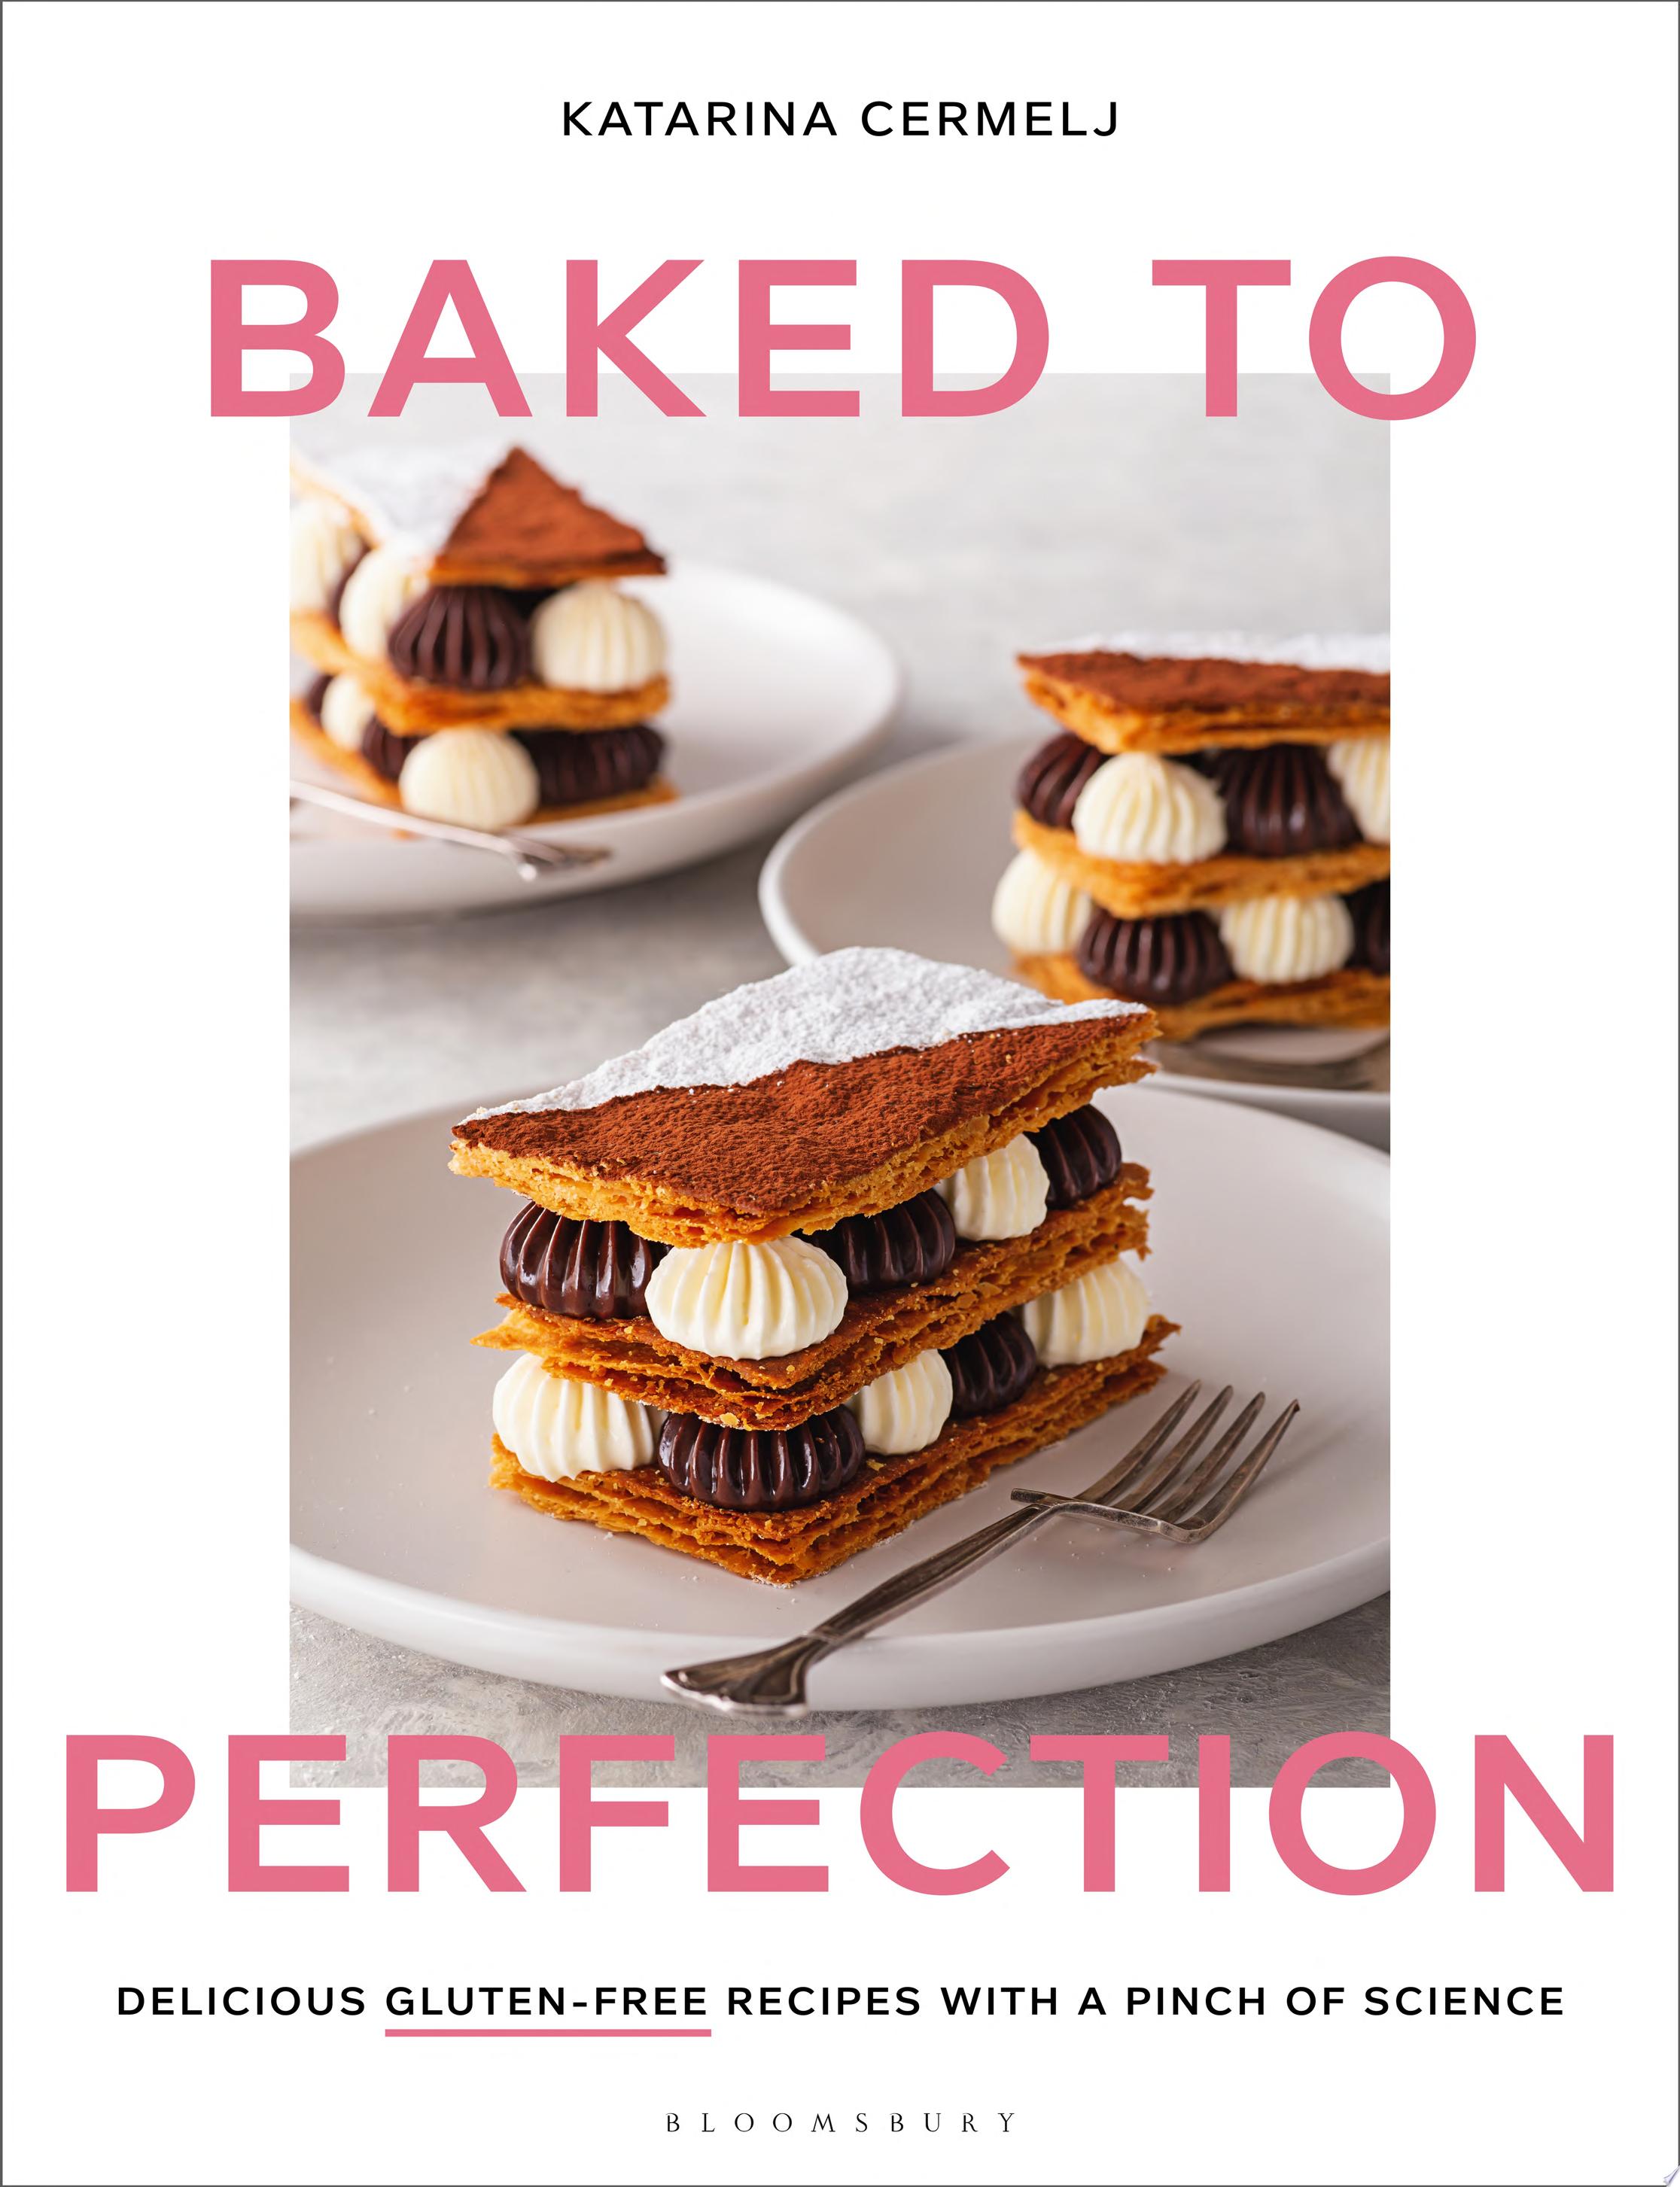 Image for "Baked to Perfection"